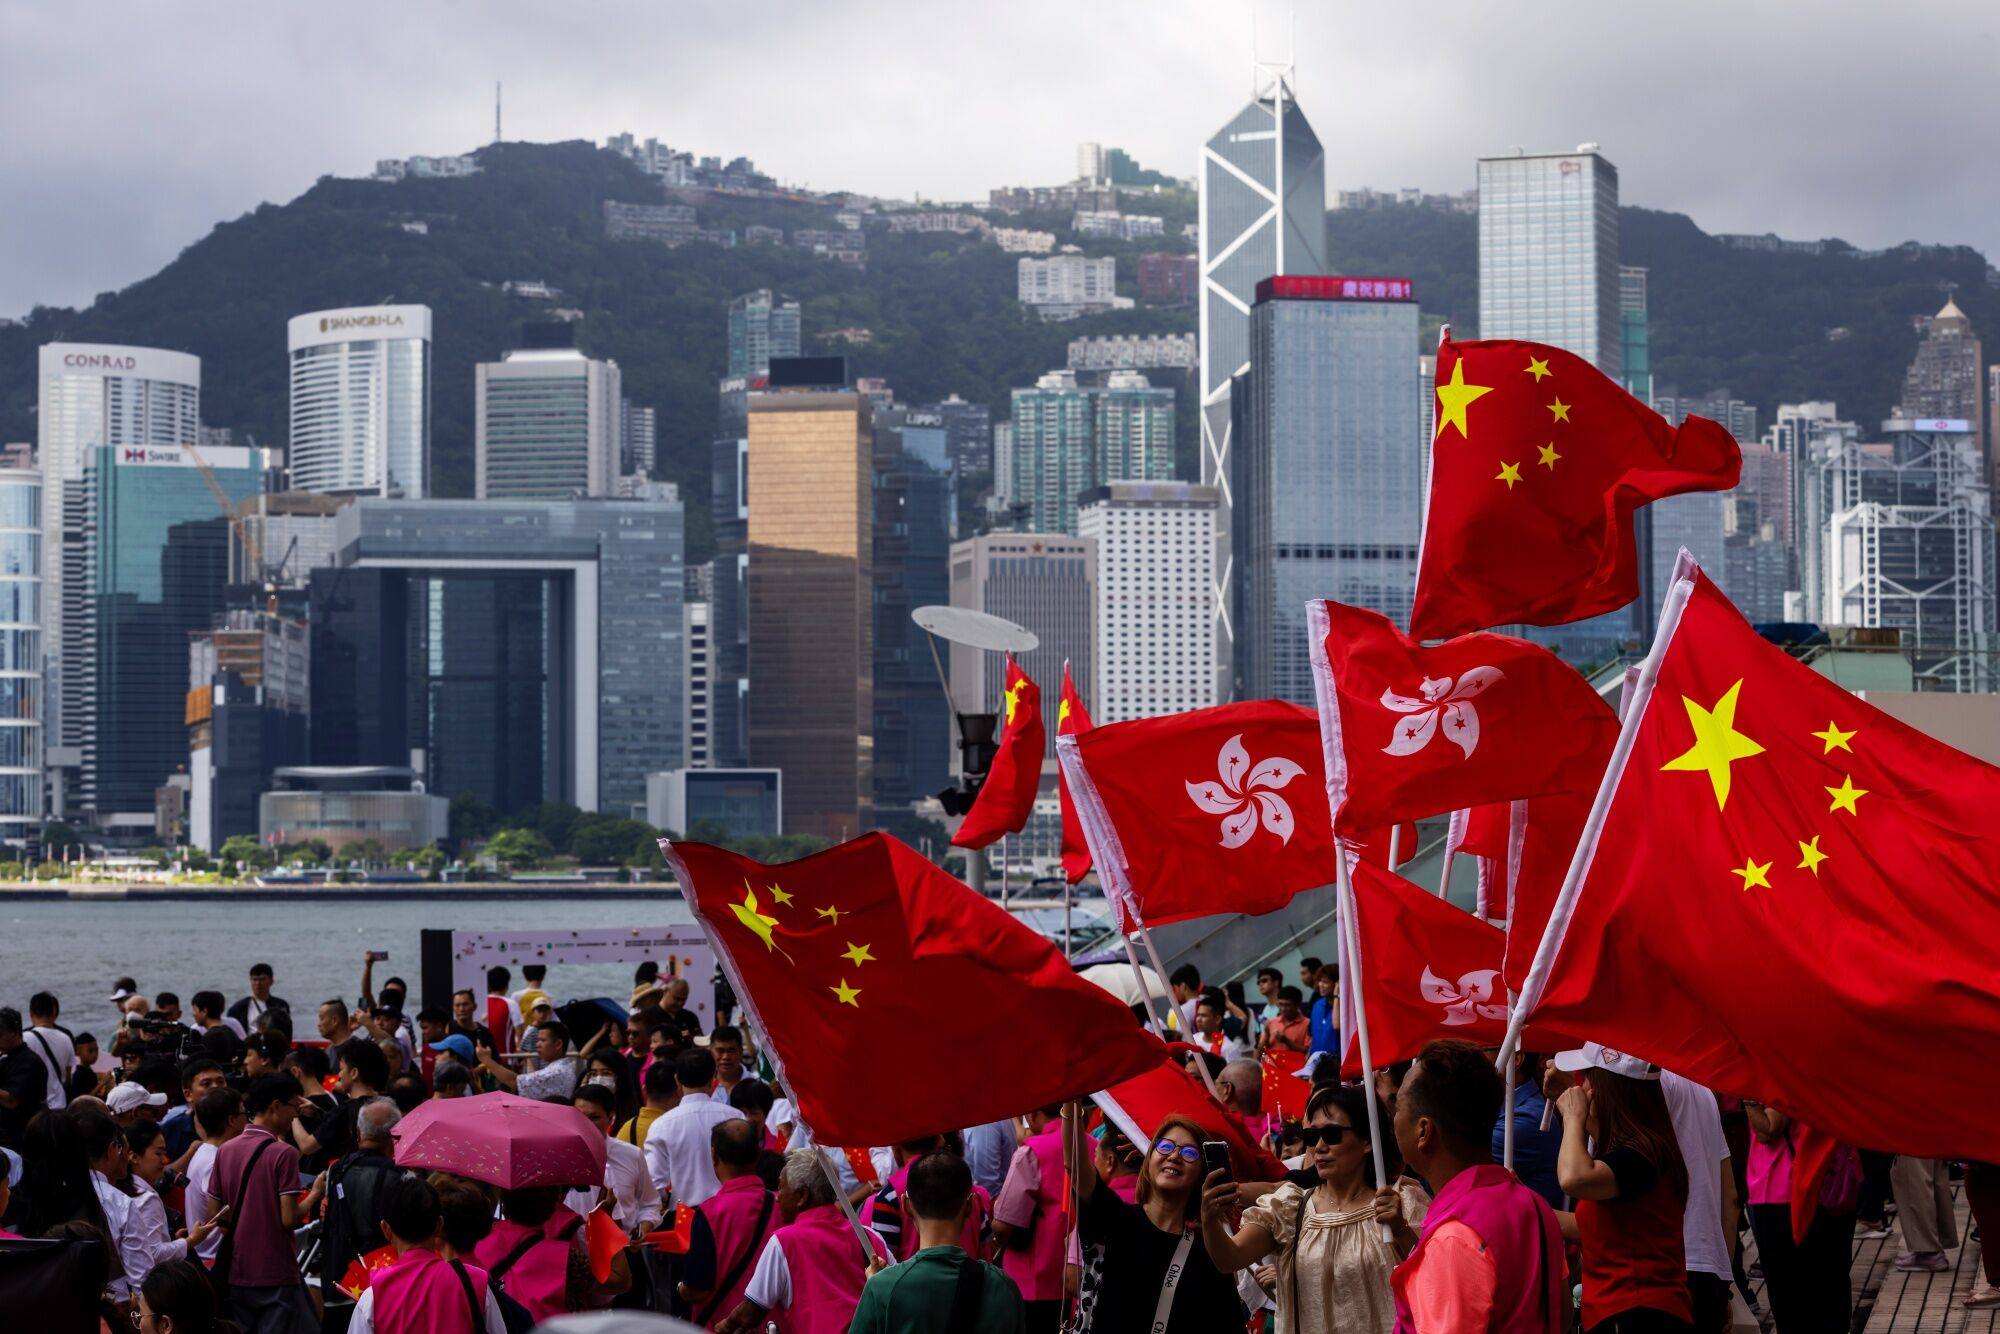 People wave the flags of China and Hong Kong during an event celebrating the 27th anniversary of Hong Kong’s return to Chinese rule in Hong Kong on July 1. Photo: Bloomberg